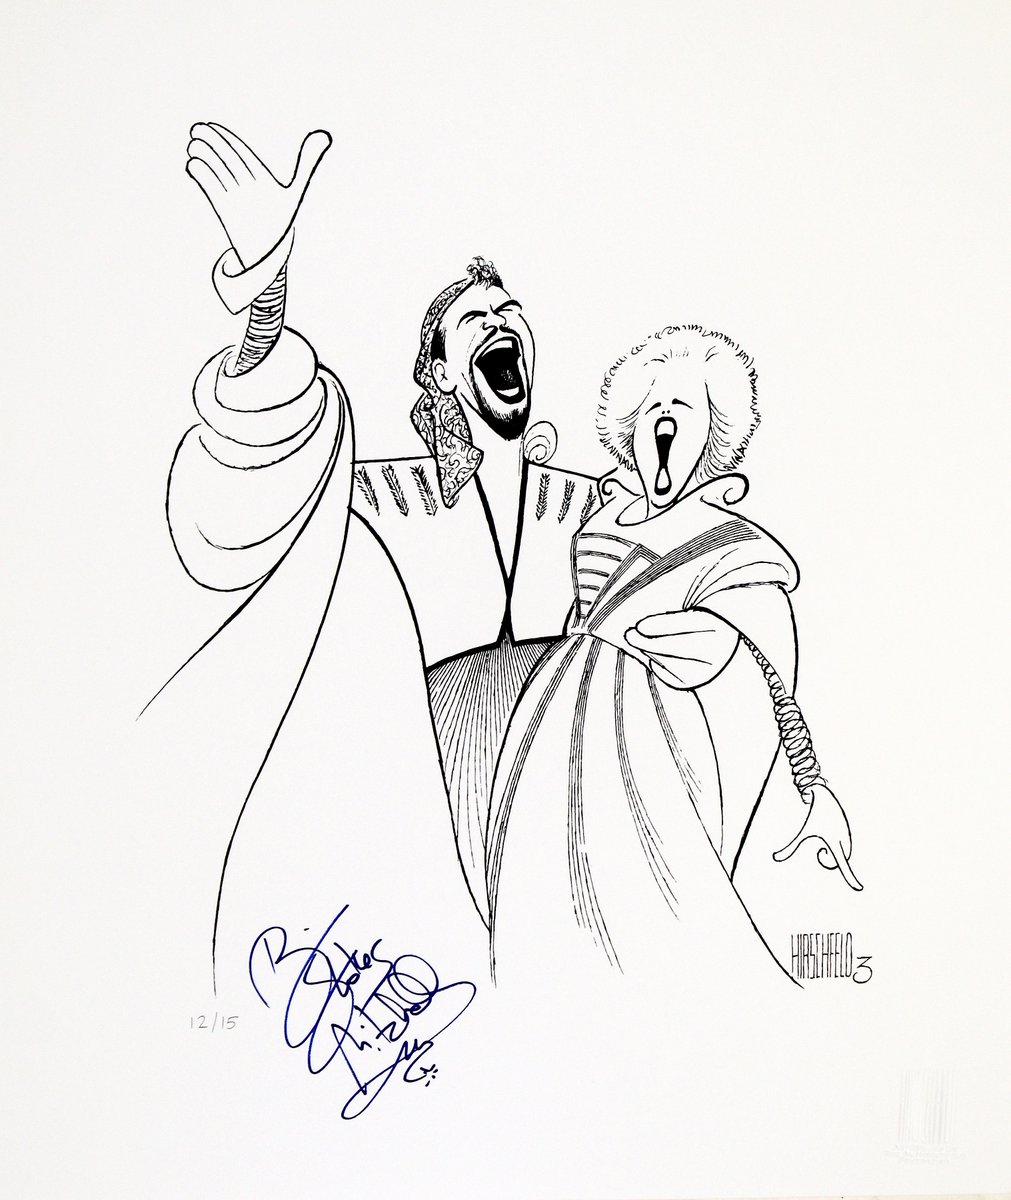 Brian Stokes Mitchell signed this print of him and Marin Mazzie in the 1999 revival of Kiss Me, Kate that played in the Martin Beck Theatre, which you may now know as the Al Hirschfeld Theatre! This extremely-limited edition print is available to bid at BroadwayCares.org/Hirschfeld